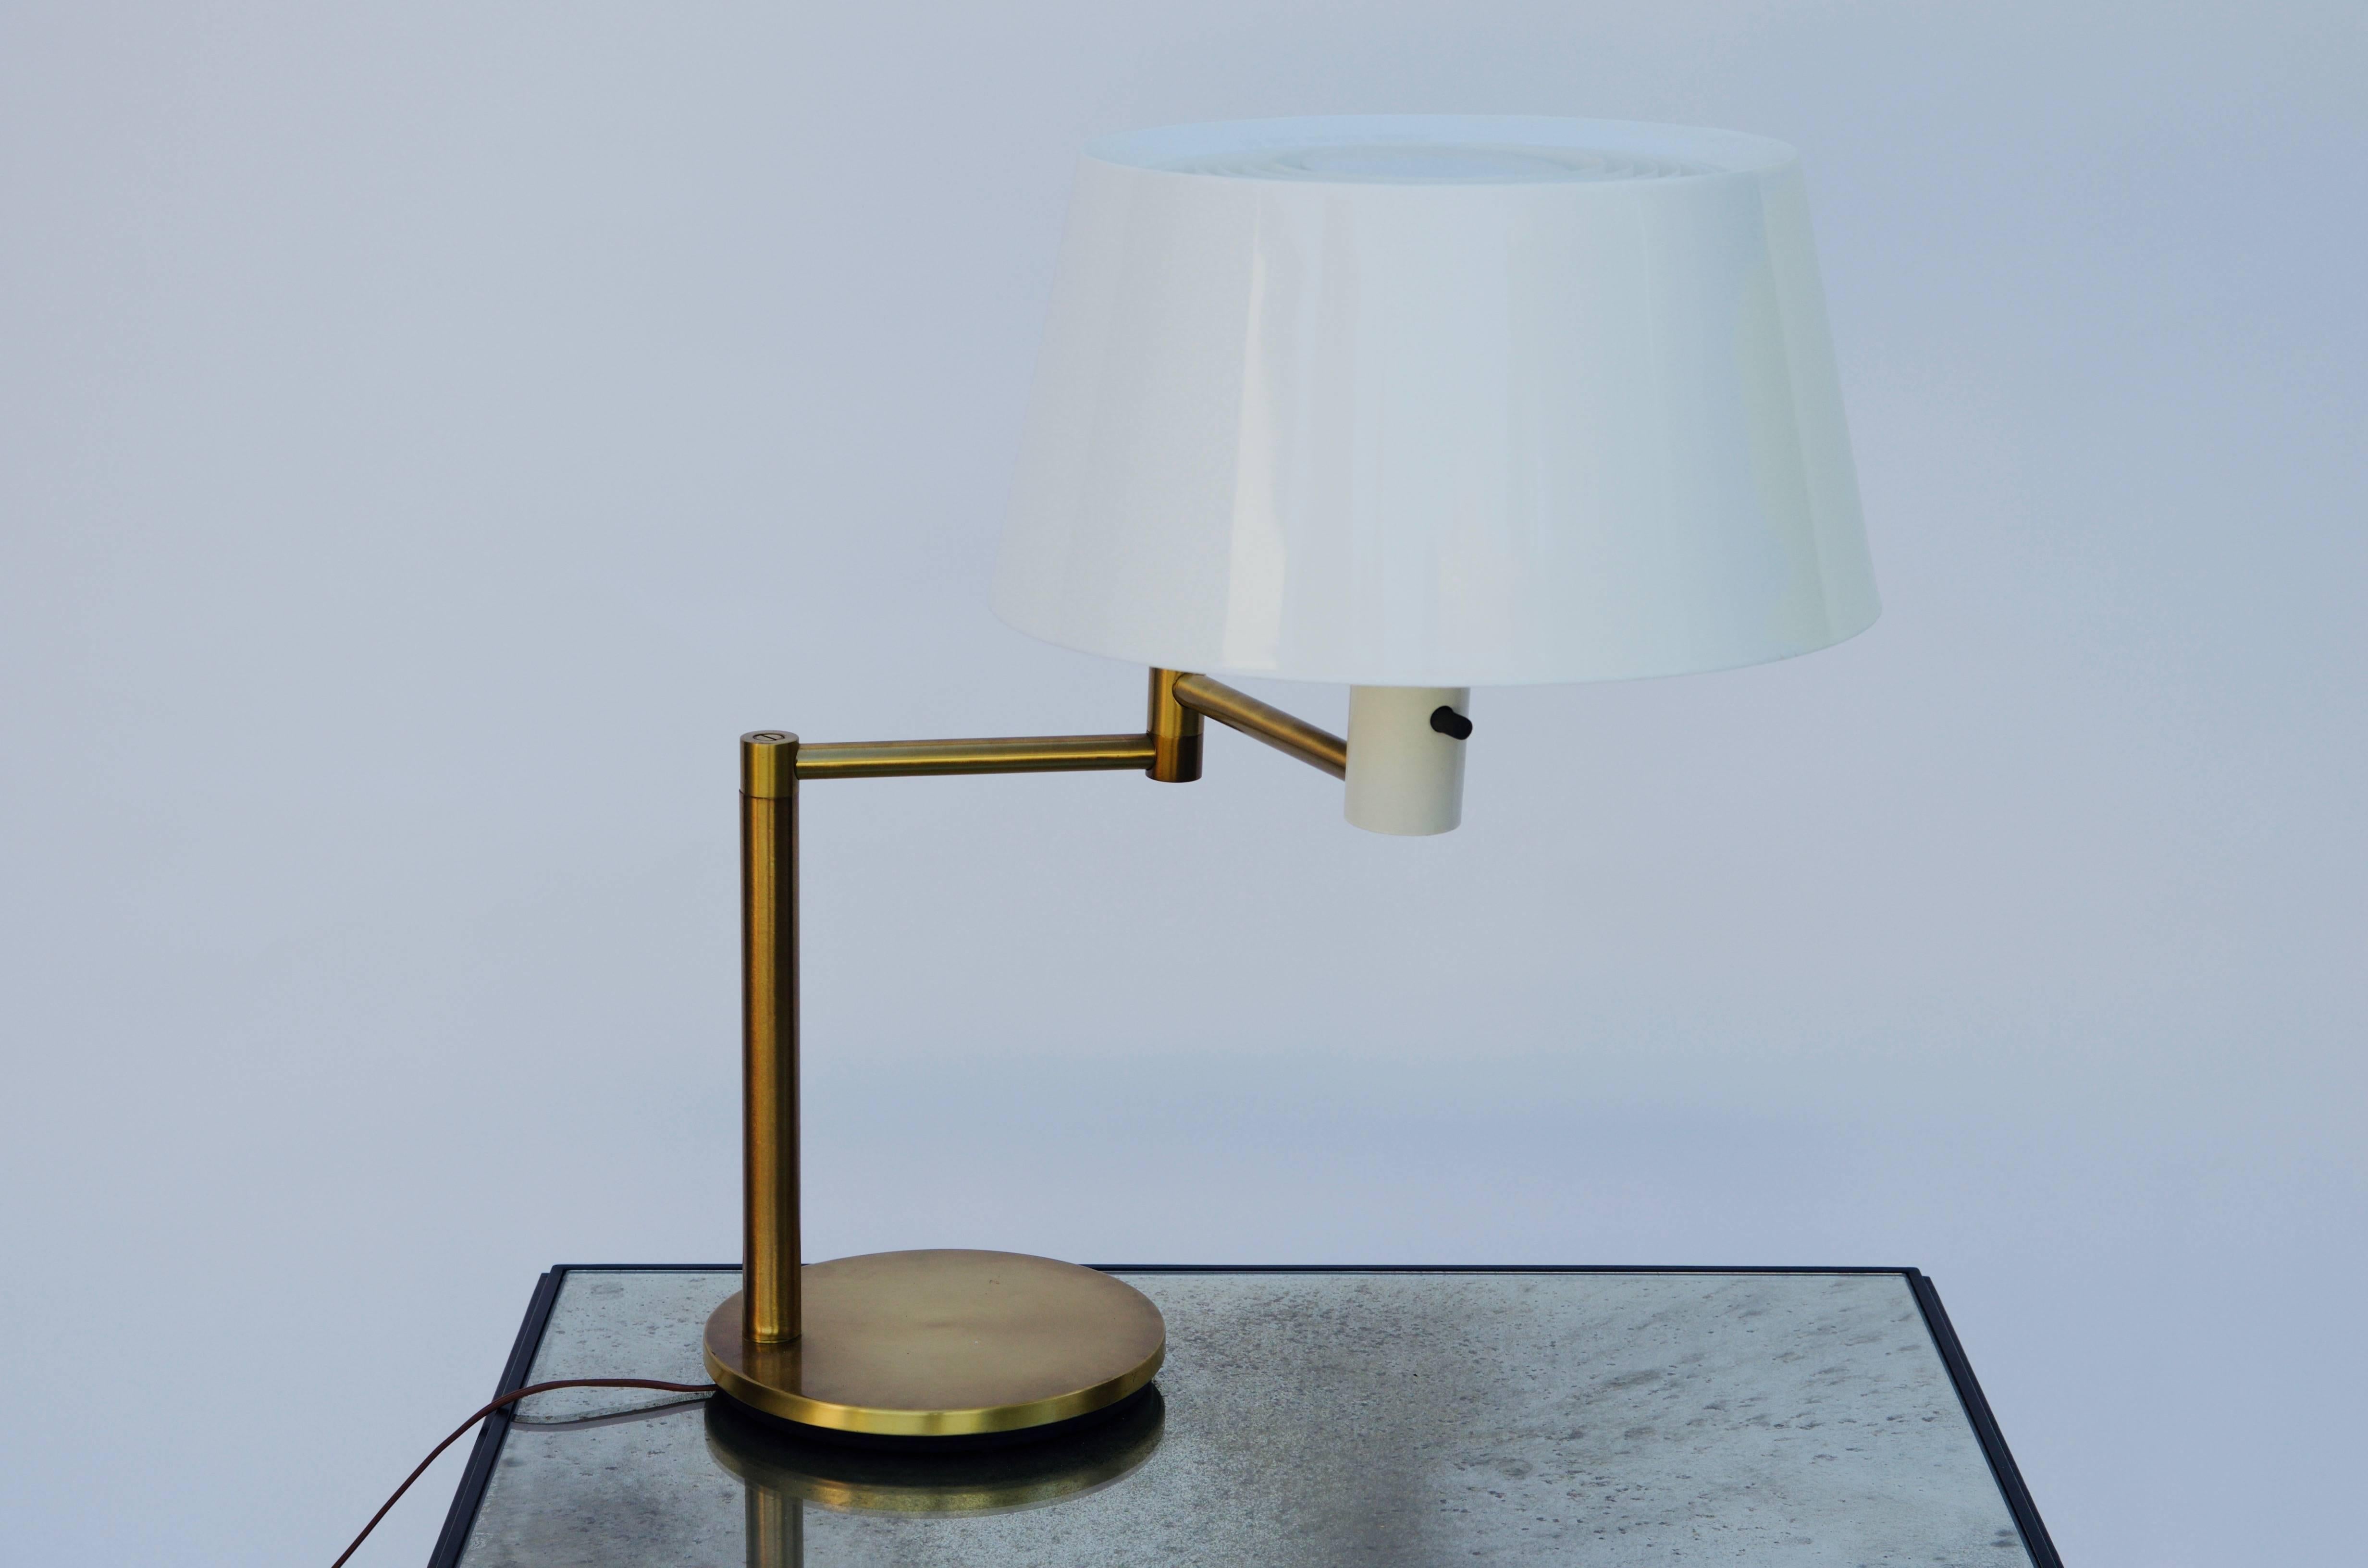 Impeccable extendable arm Lumilux study lamp by Gerald Thurston for Lightolier. Brushed brass base with original one-piece molded shade-diffuser in excellent condition, circa 1970.